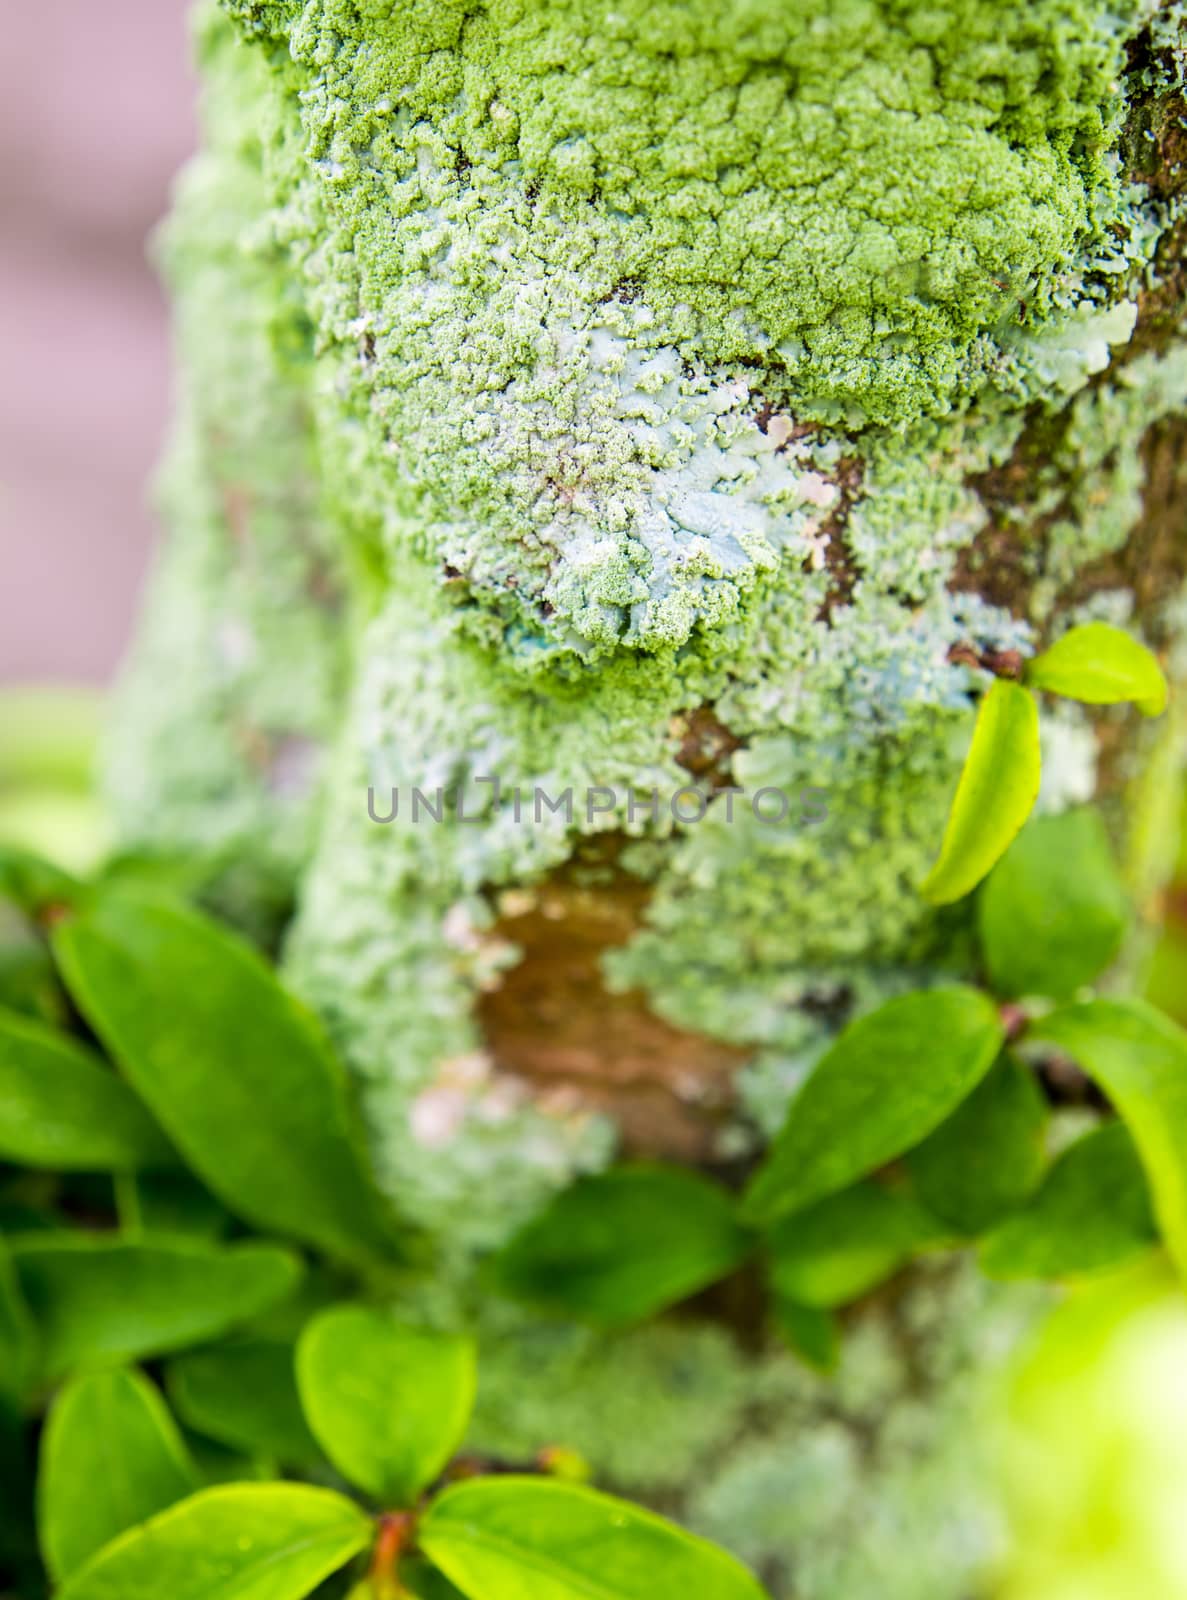 Close-up of beautiful green lichen, moss and algae growing covered on tree trunk in the garden